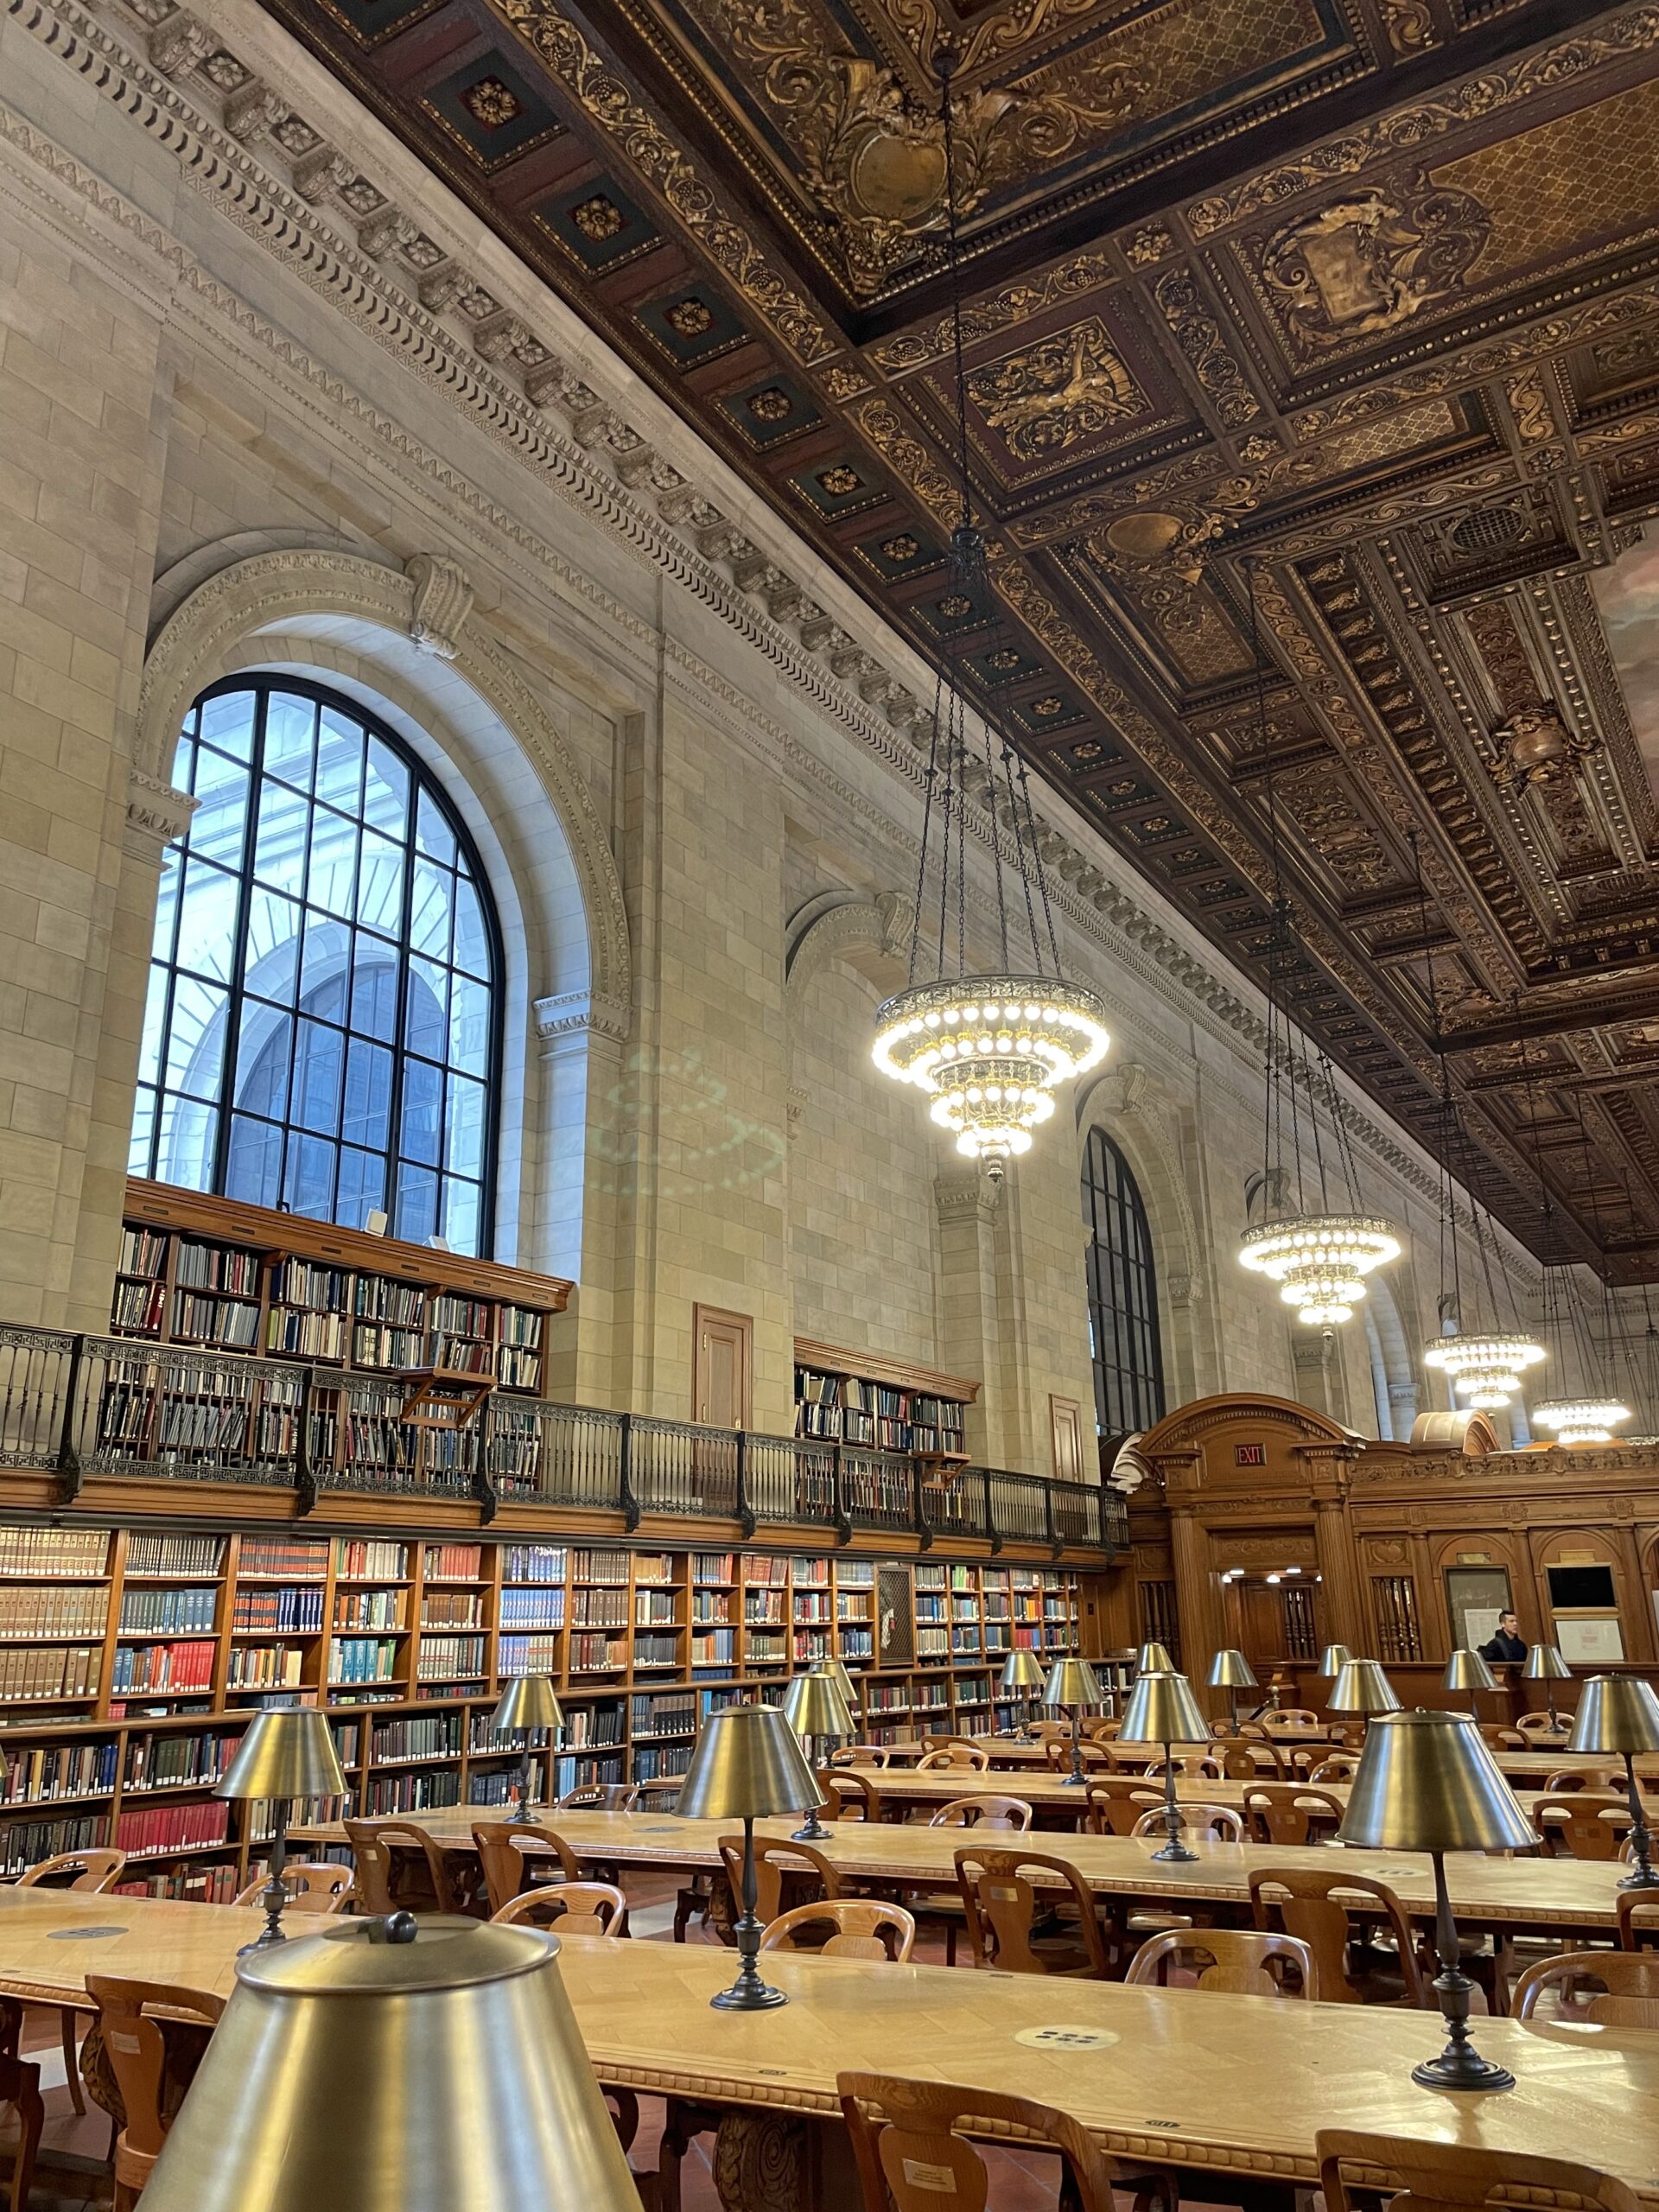 Thee Rose Main Reading Room at the New York Public Library.